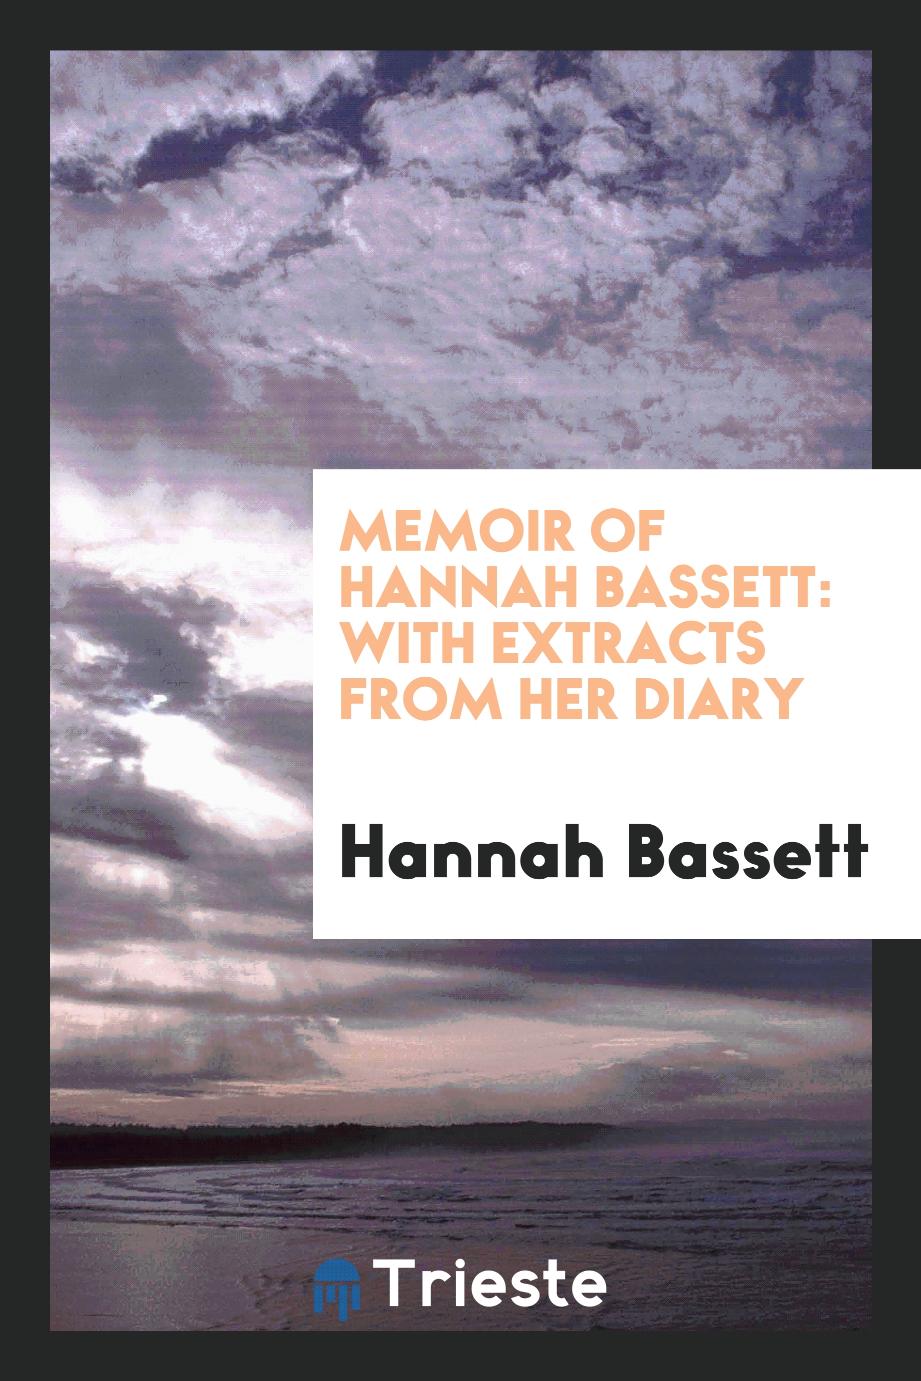 Memoir of Hannah Bassett: With Extracts from Her Diary